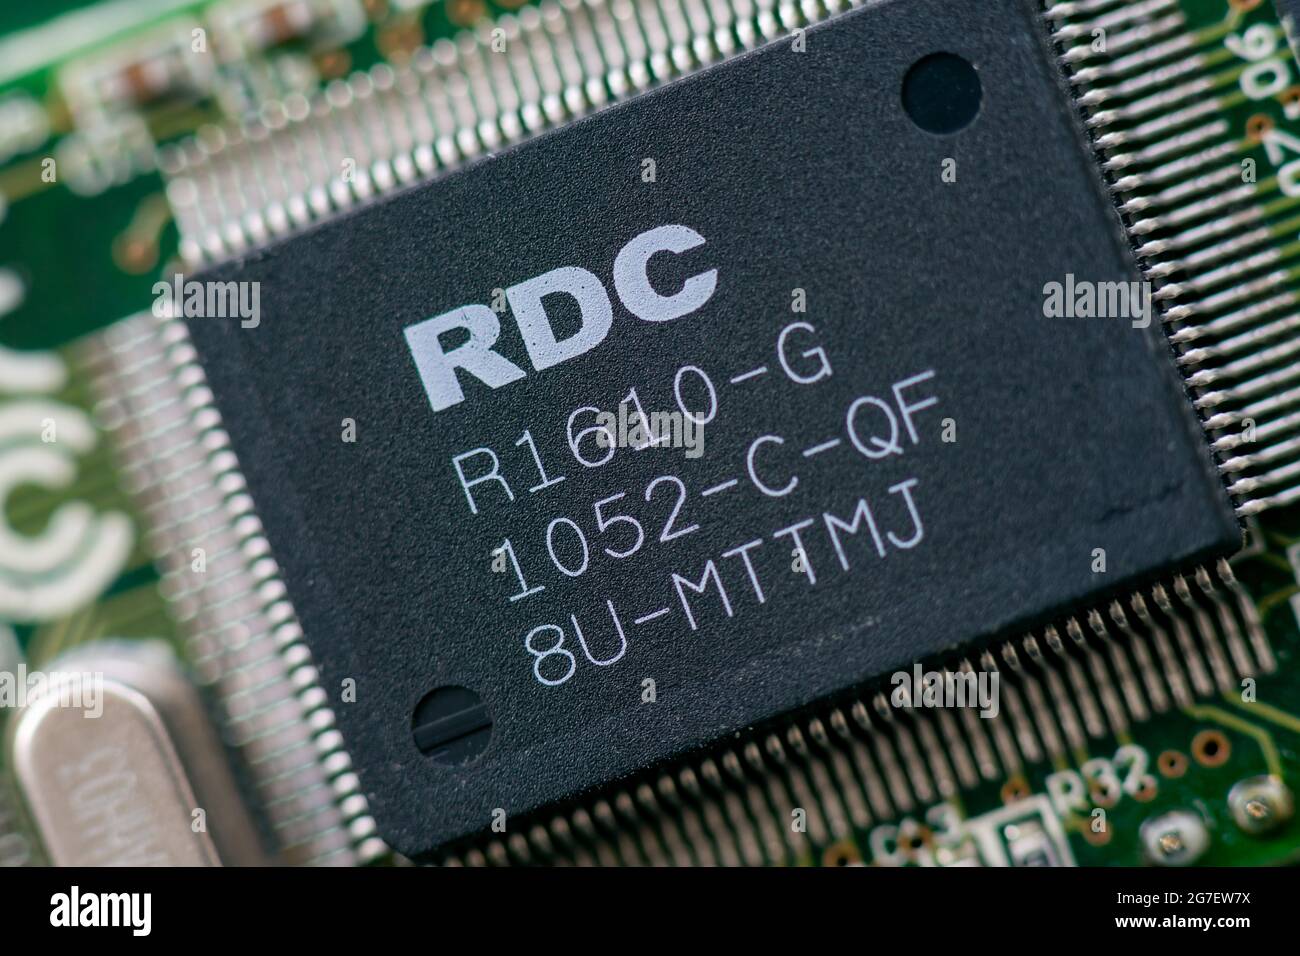 Timisoara, Romania - March 15, 2020: Close-up of a RDC R1610-G microcontroller. Electronic components Stock Photo